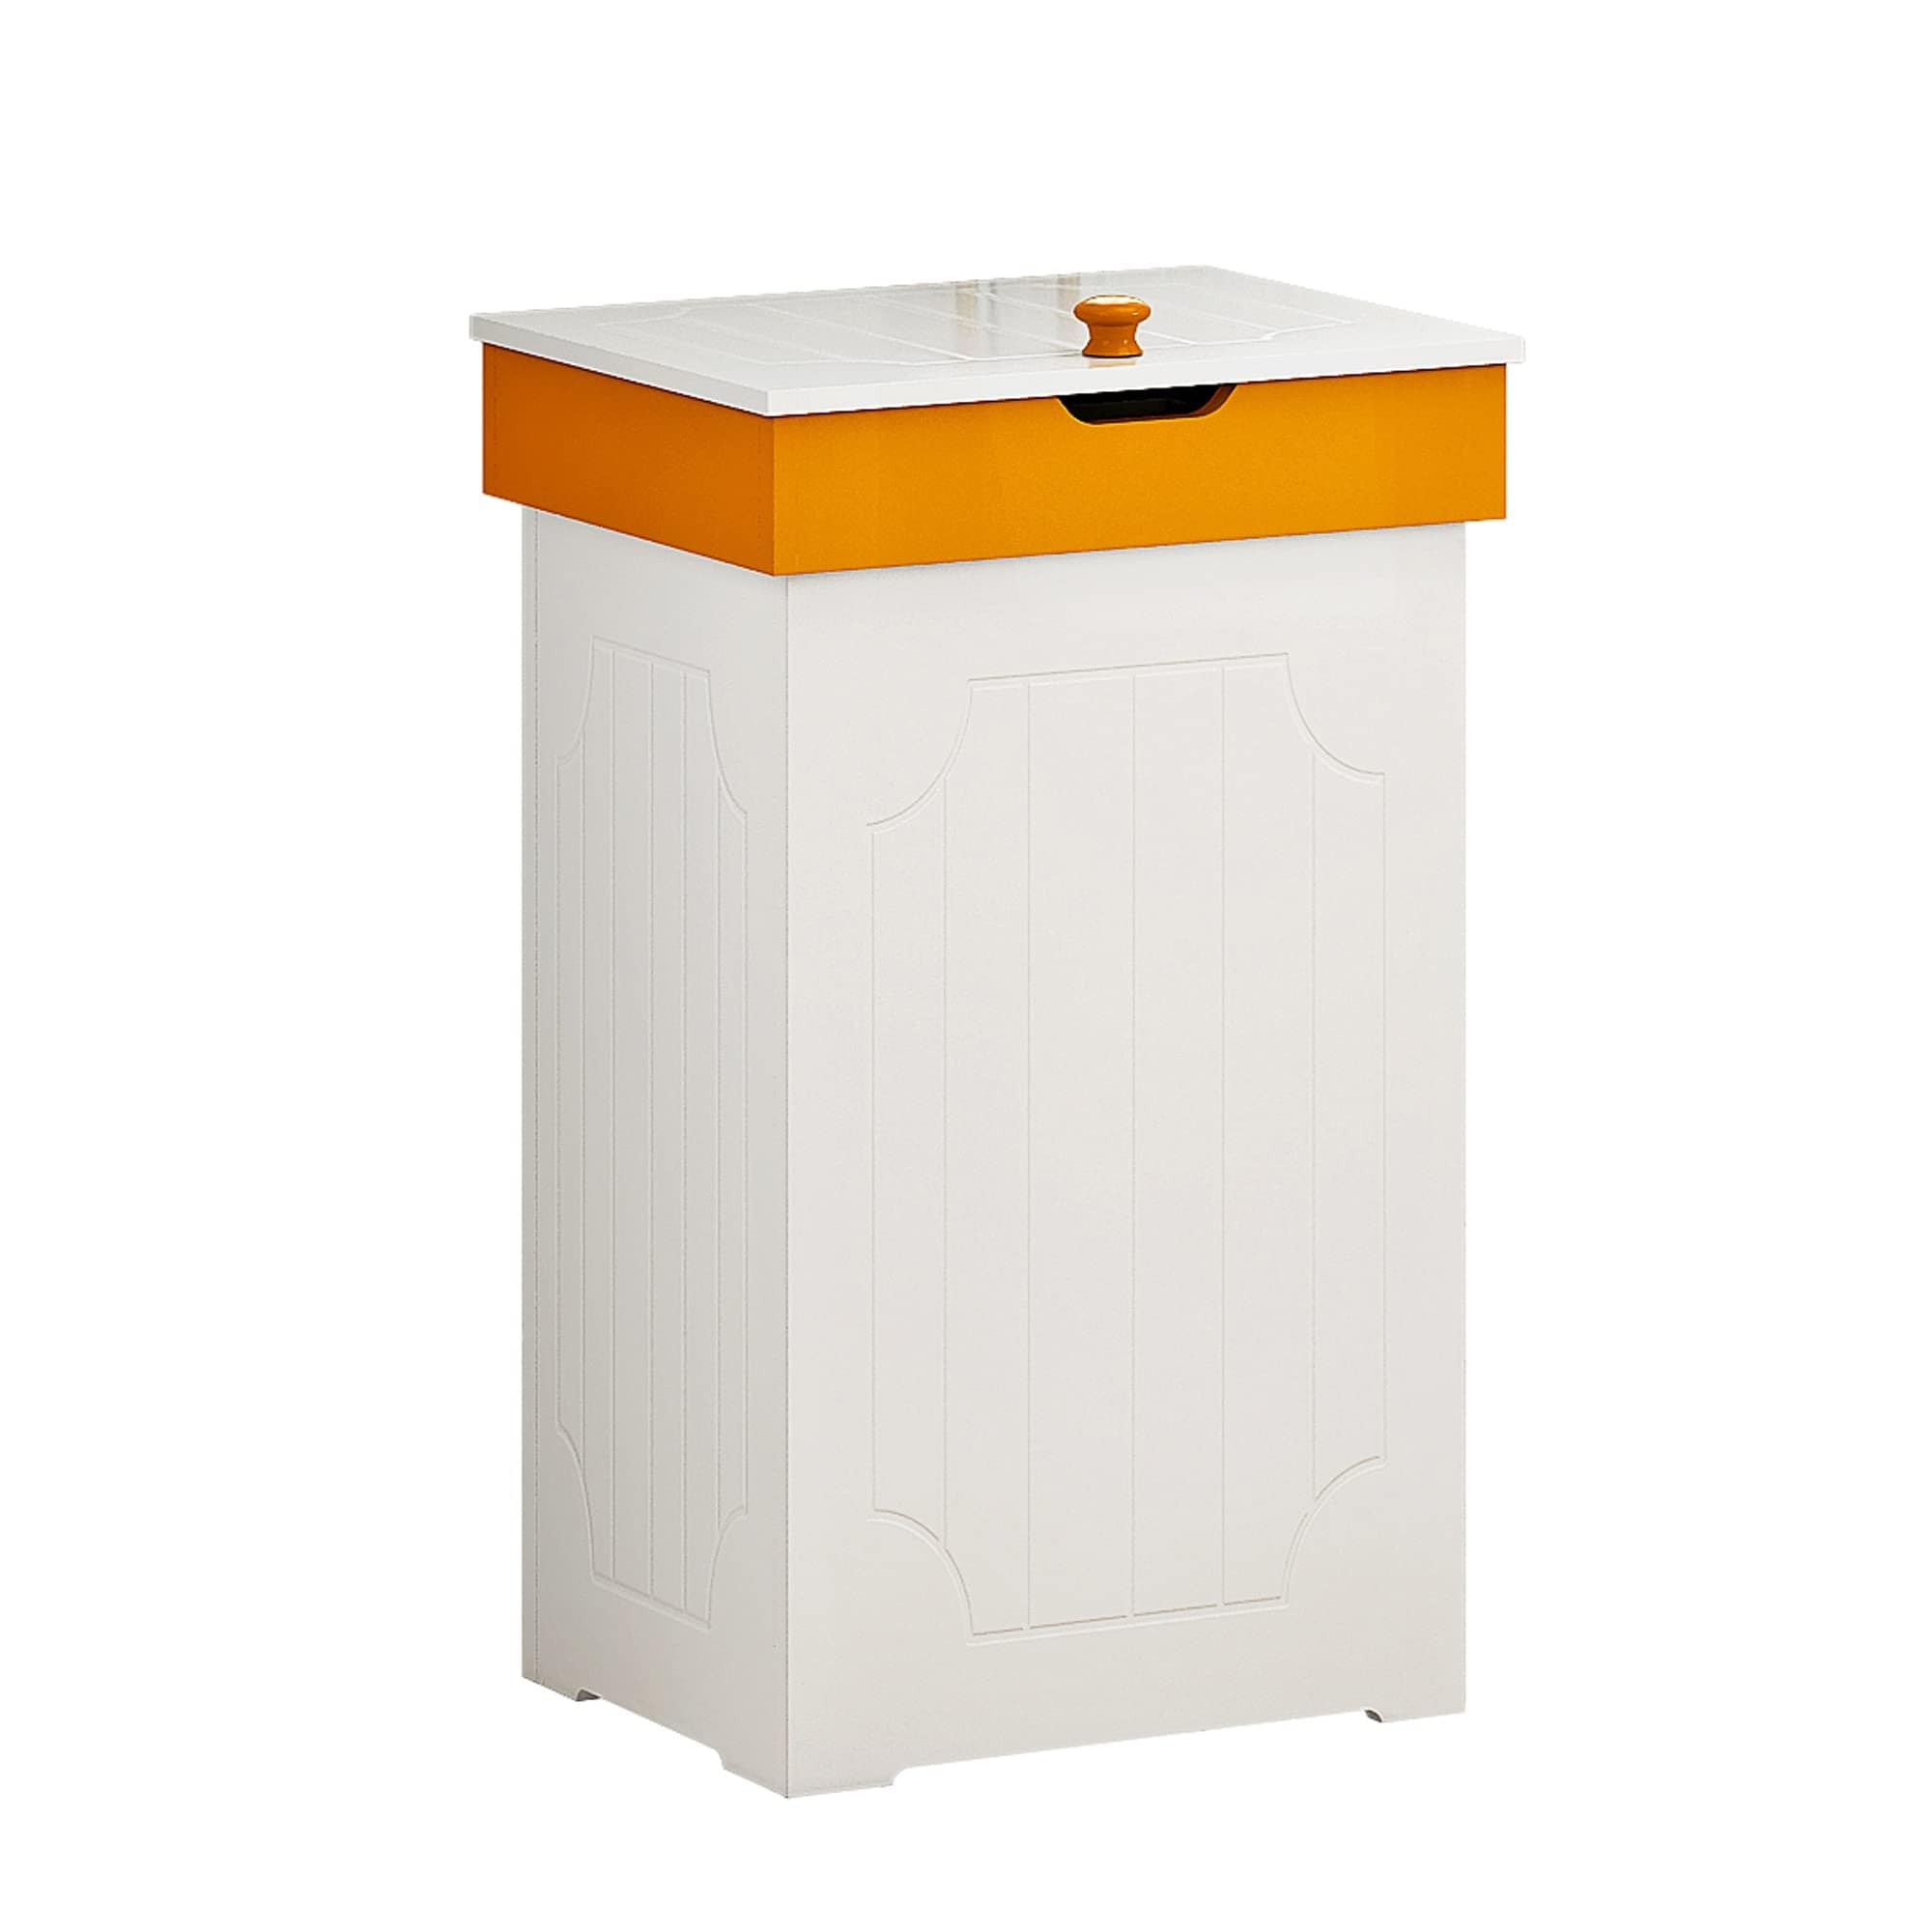 Trash Can Cabinet, 23 Gallon Kitchen Garbage Can, Wooden Recycling Trash Bin,  Dog Proof Trash Can, Home Trash Cabinet with Lid - Bed Bath & Beyond -  39188654